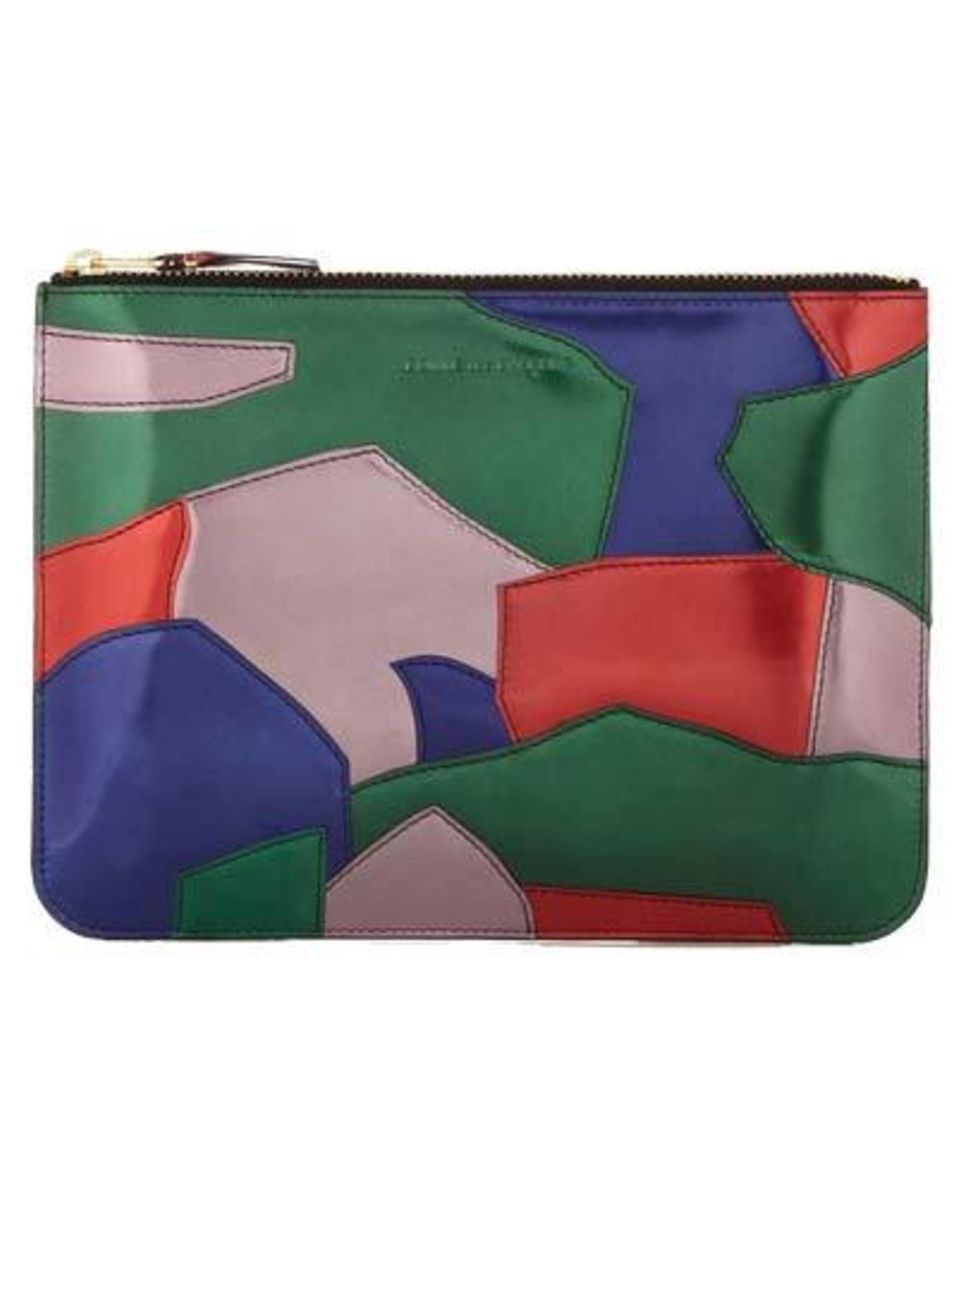 <p>Precious Metals.. </p><p>Patchwork metallic pouch £205 by CDG from <a href="http://shop.doverstreetmarket.com/comme-des-garcons/wallets/patchwork-metal/cdg-patchwork-metal-wallet-sa5100pm">DoverStreetMarket</a></p>